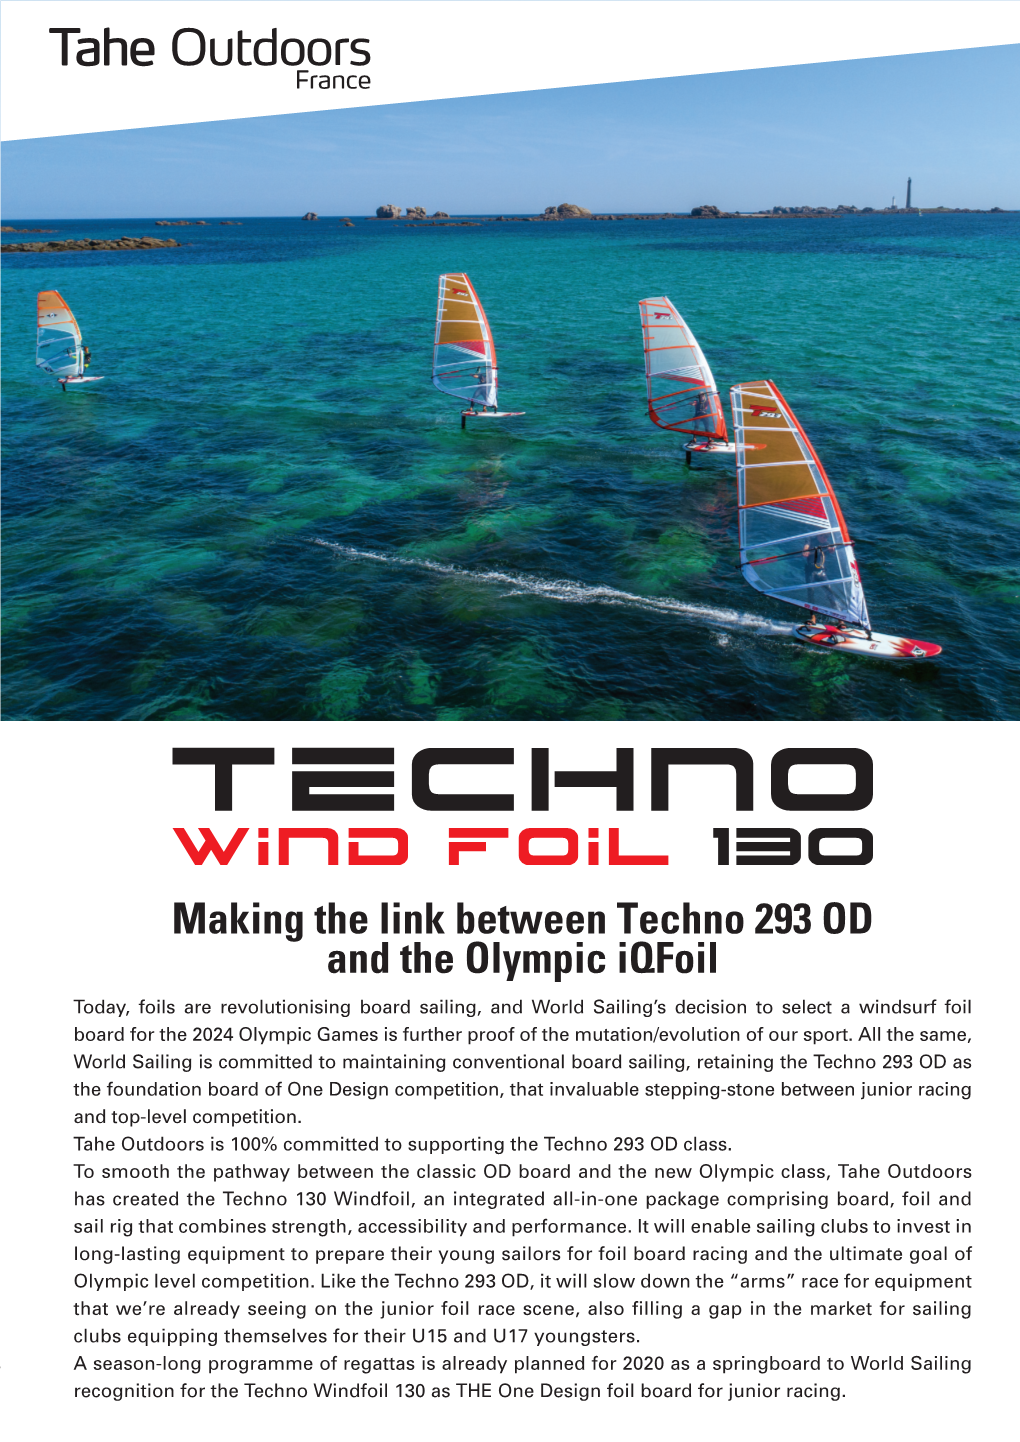 Making the Link Between Techno 293 OD and the Olympic Iqfoil